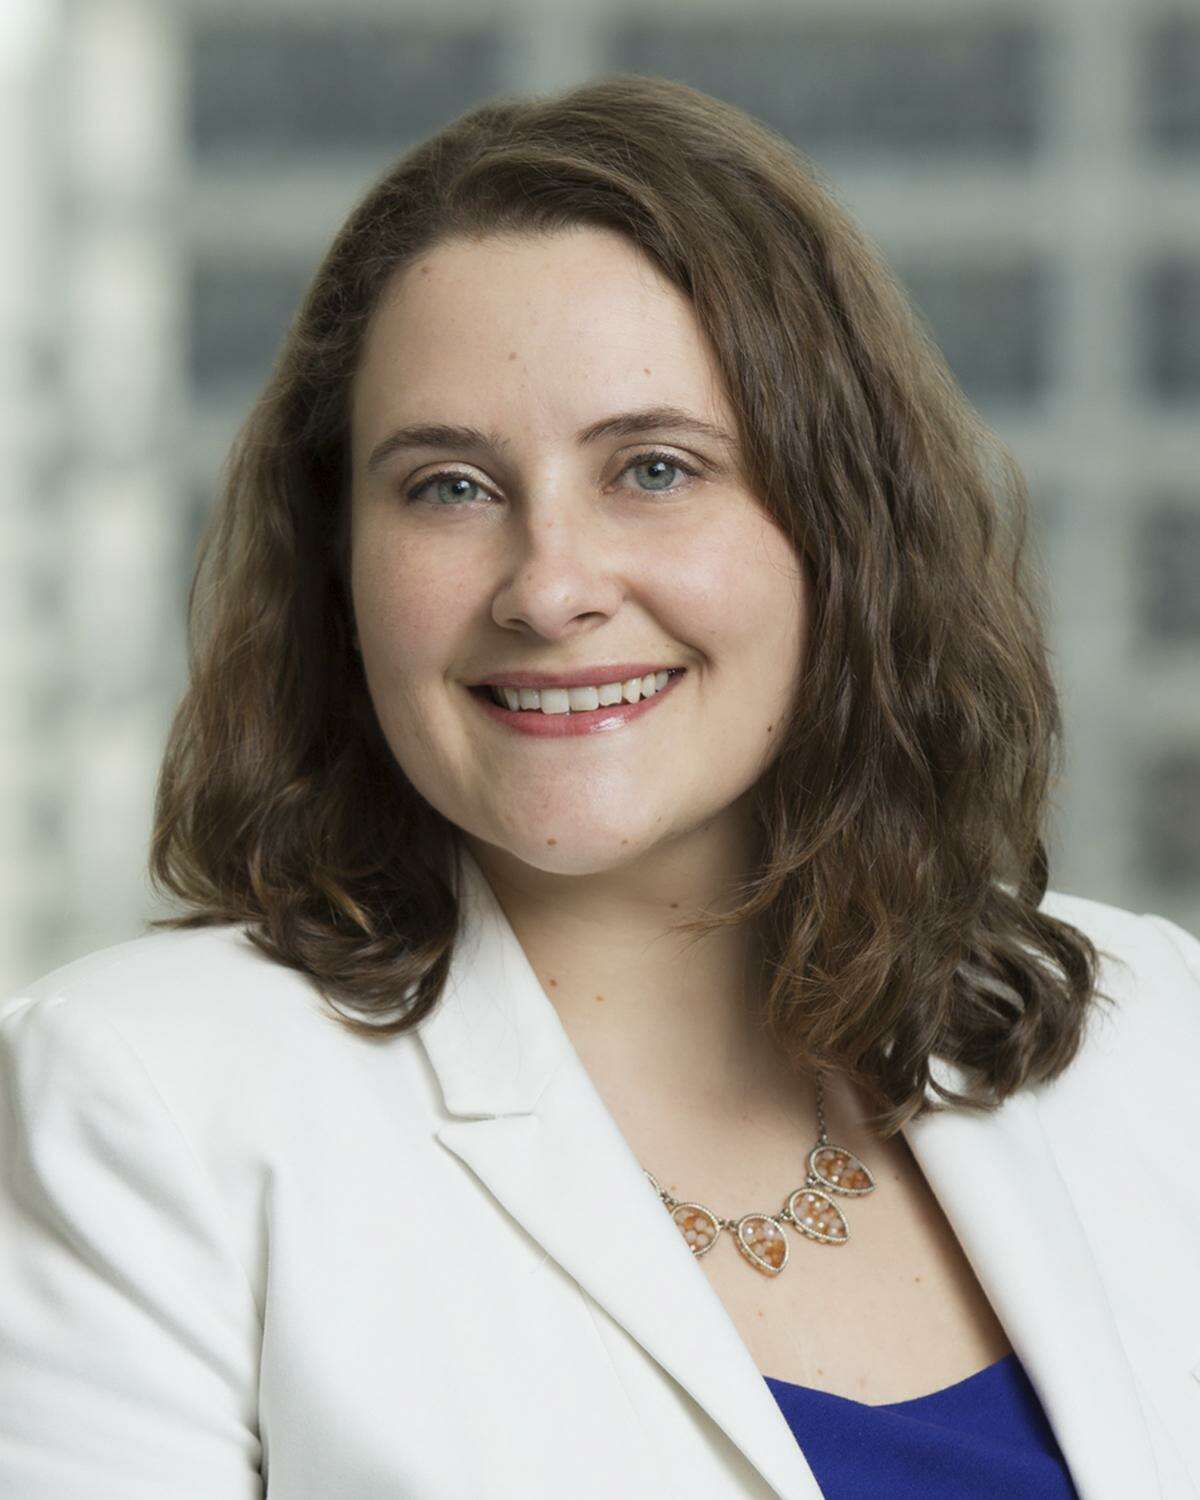 Megan Schmid, Thompson & Knight, has been elected as a partner in the law firm’s trial practice group.